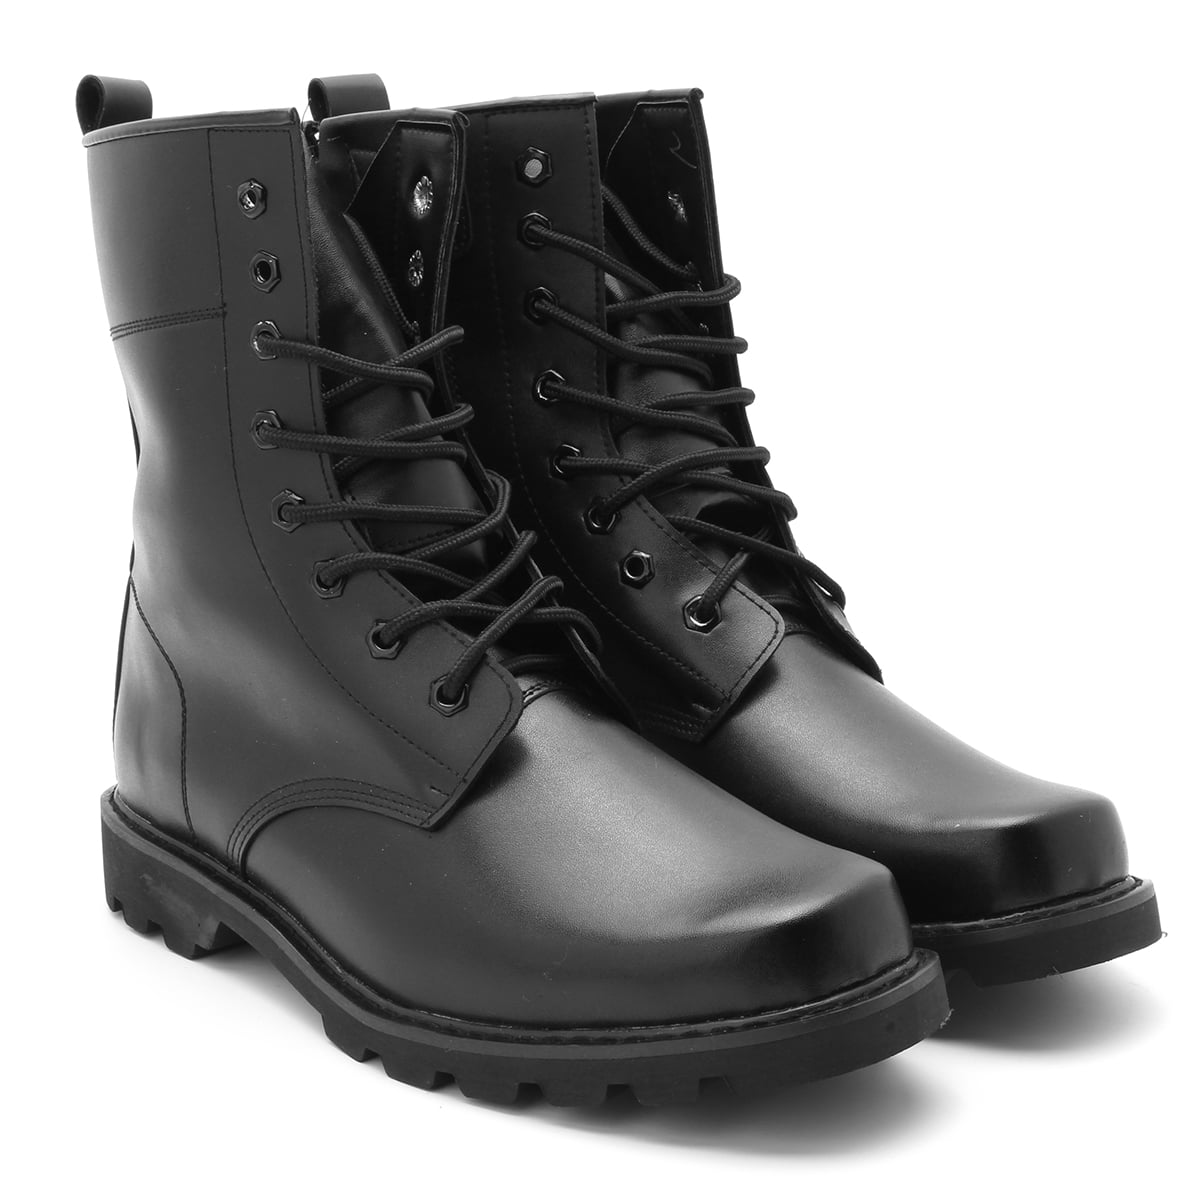 Men's Warm Waterproof Military Boots Steel Head Safe Work Black Lace Up Boots